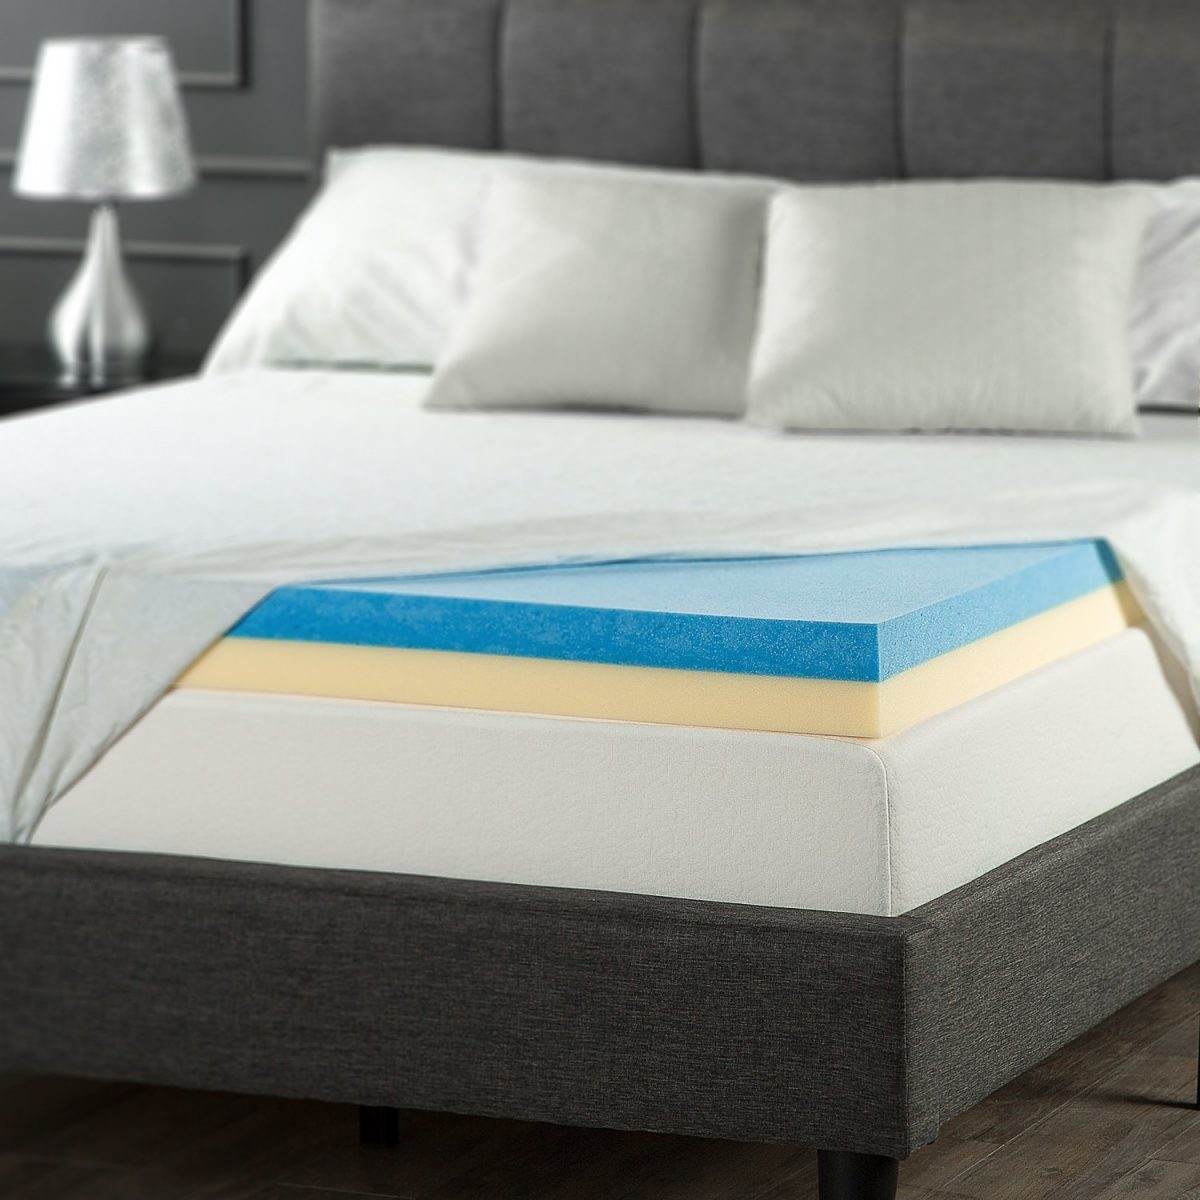 gel cooling pad for mattress